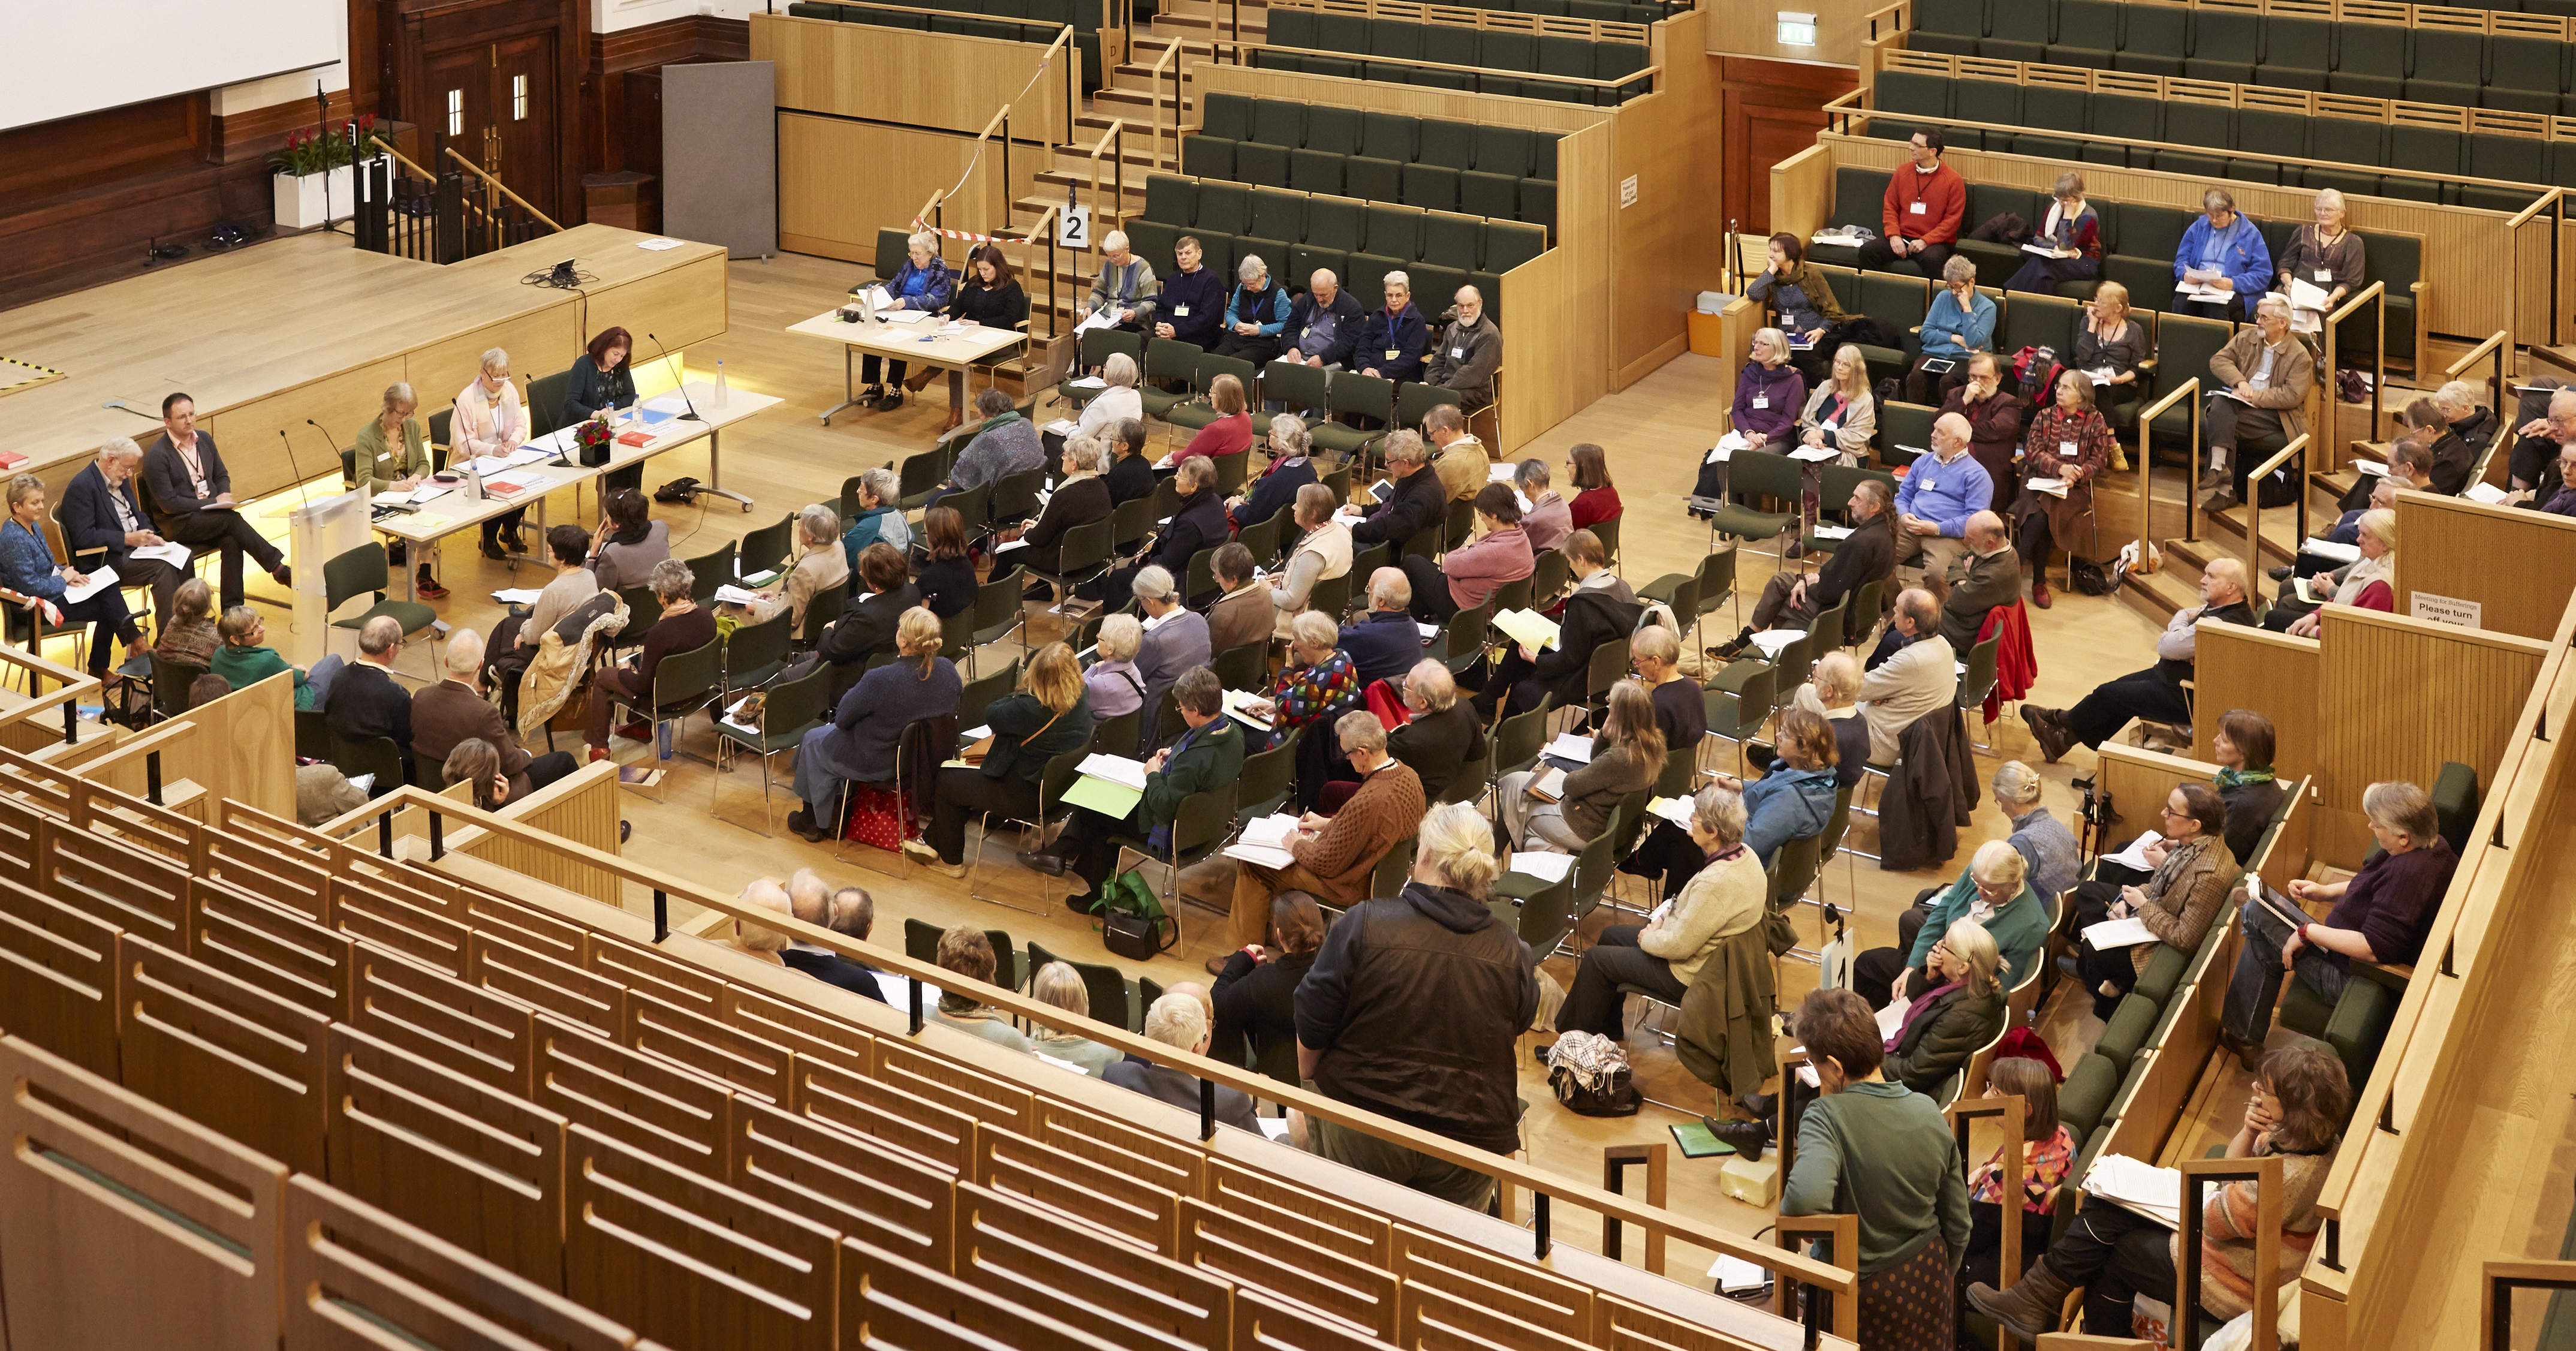 Quakers gathered for Meeting for Sufferings